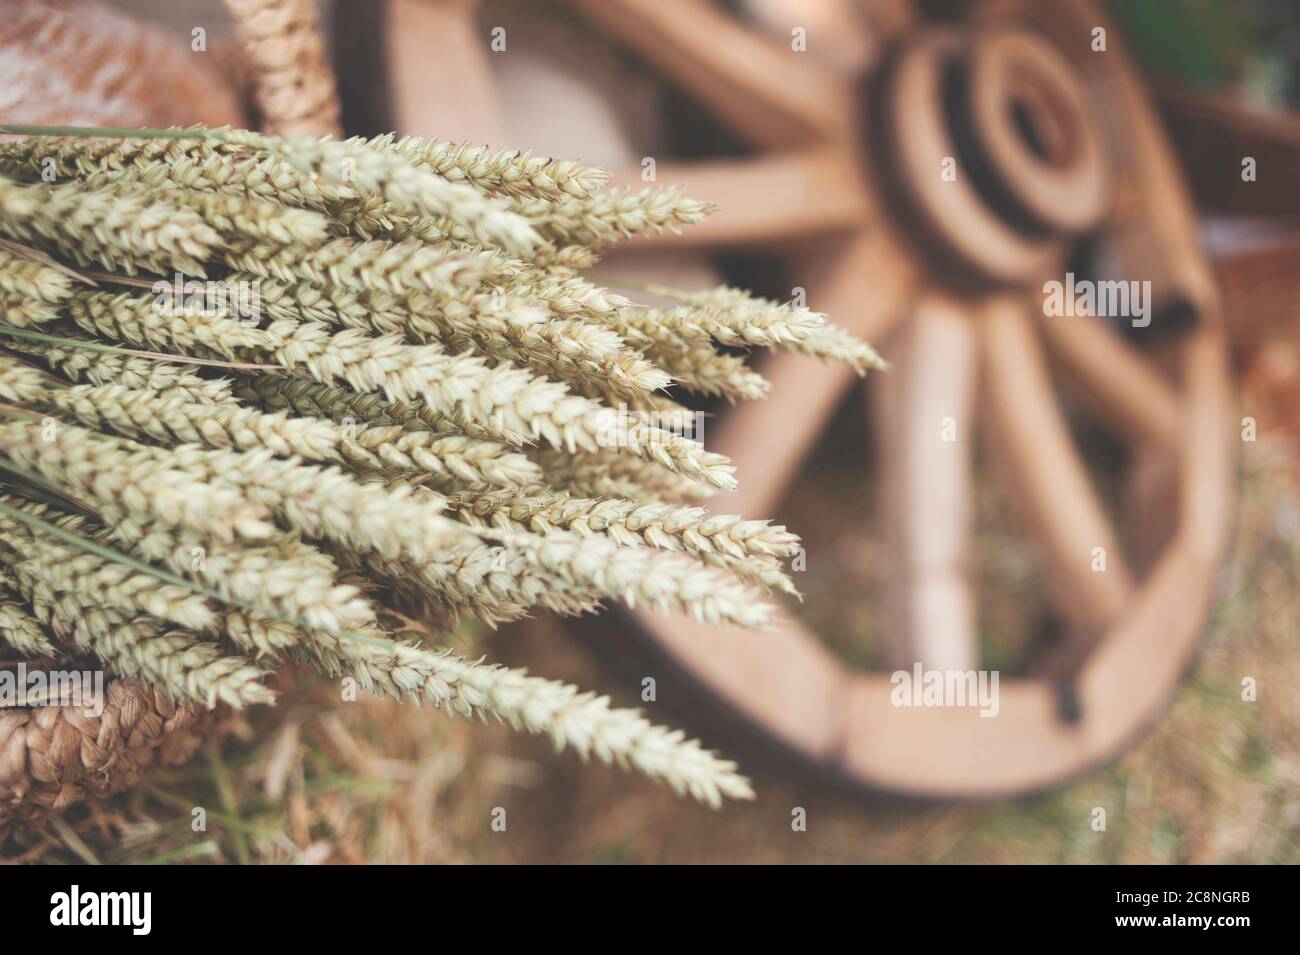 concept: ears of wheat in a basket on a farm background Stock Photo